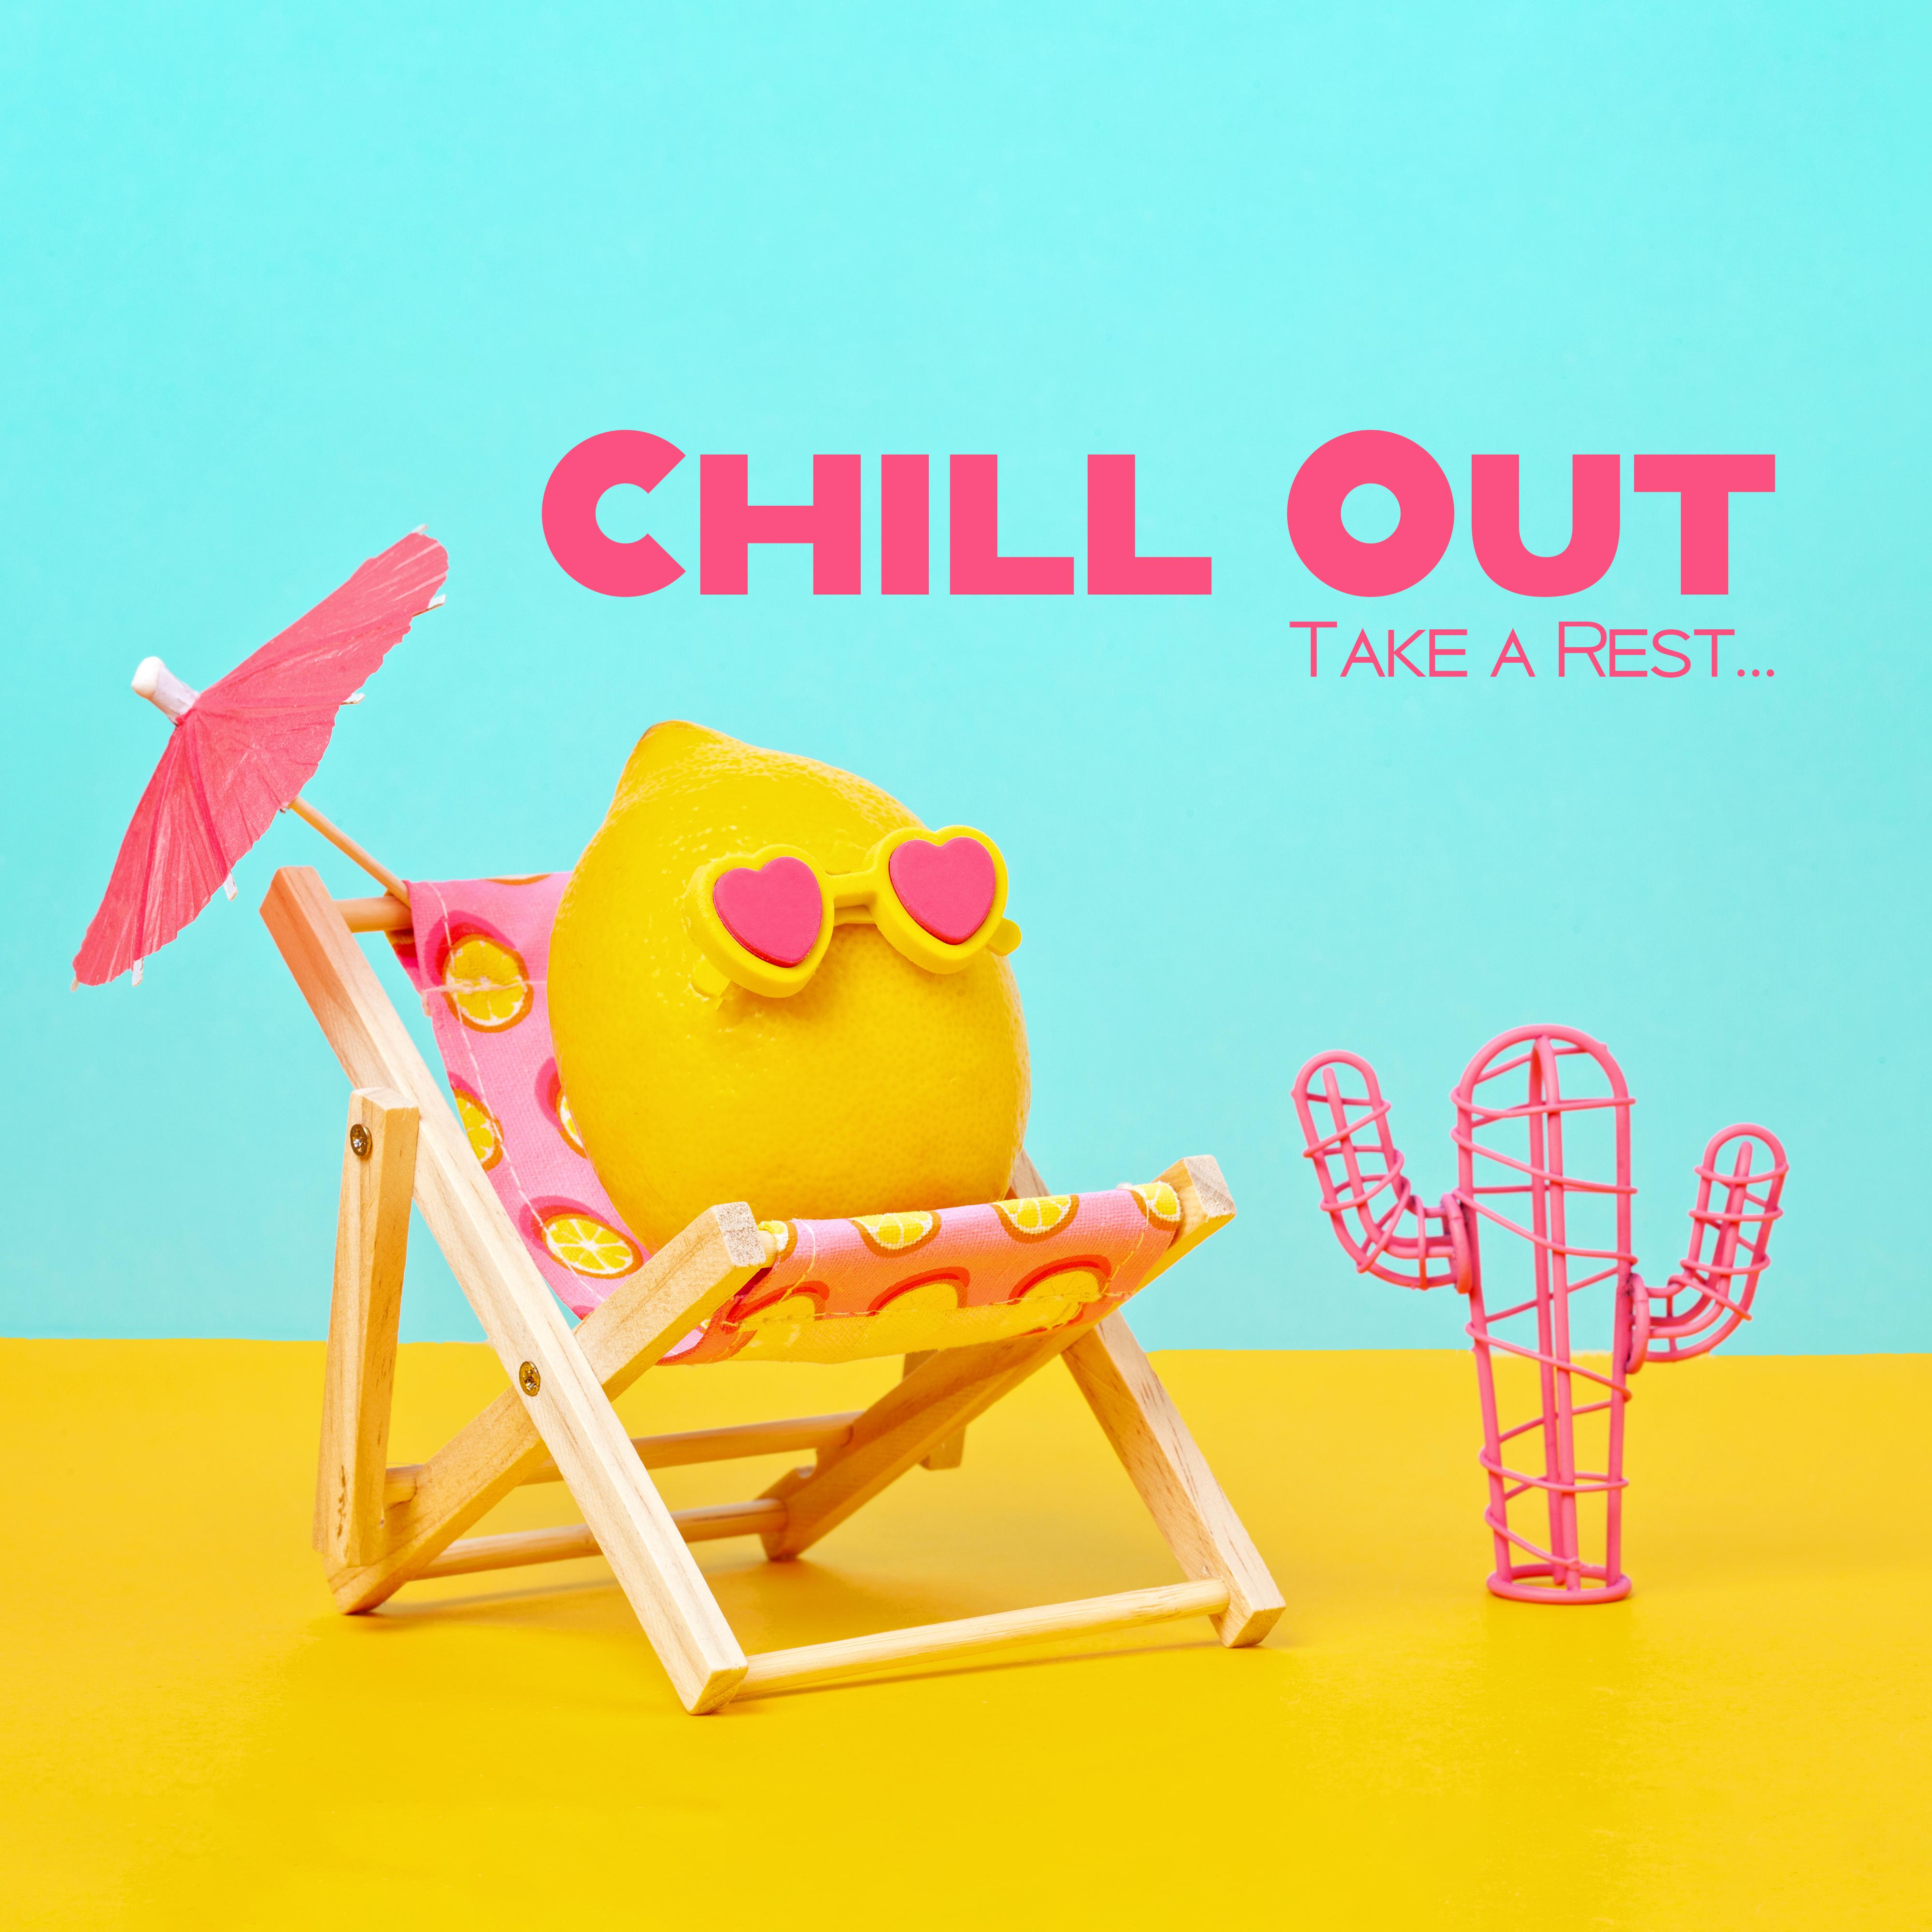 Chill Out, Take a Rest  2019 Most Relaxing Chillout Music Vibes, Tropical Relax Beats  Deep Melodies, Lounge Songs, Calming Down, Stress Relief